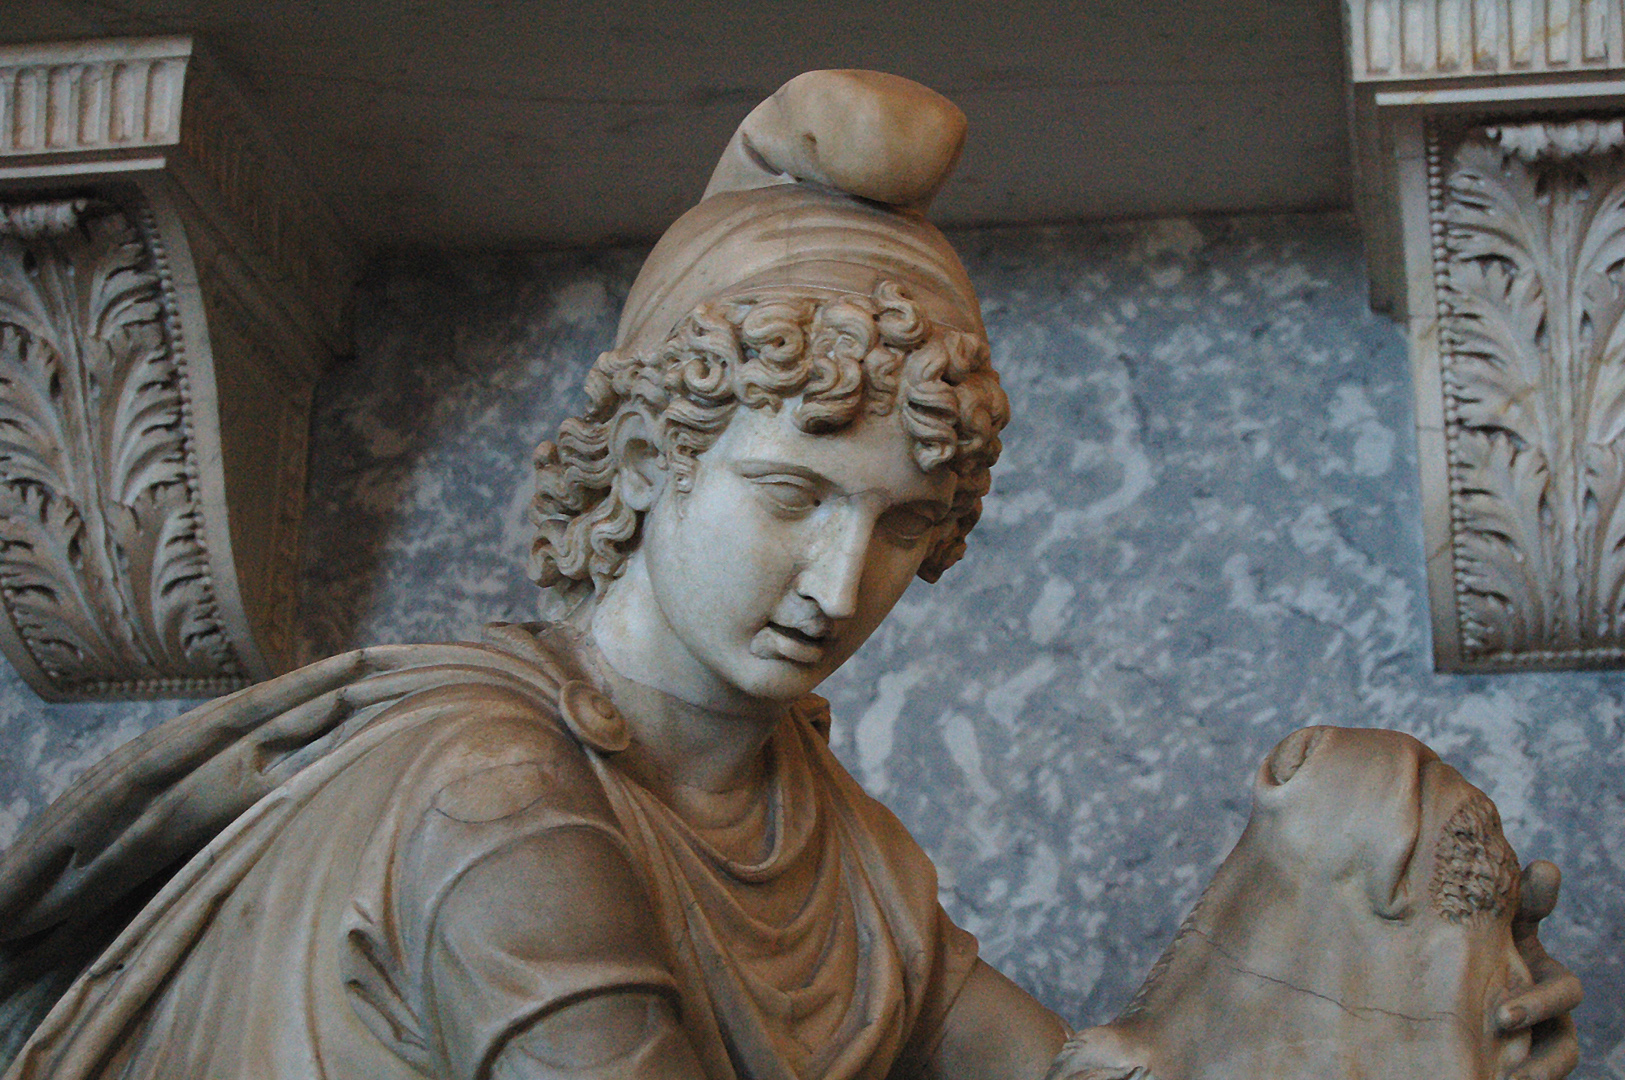 Mithras die een stier slacht (detail), Rome., Mithras and the Bull. Vatican Museums, Rome.